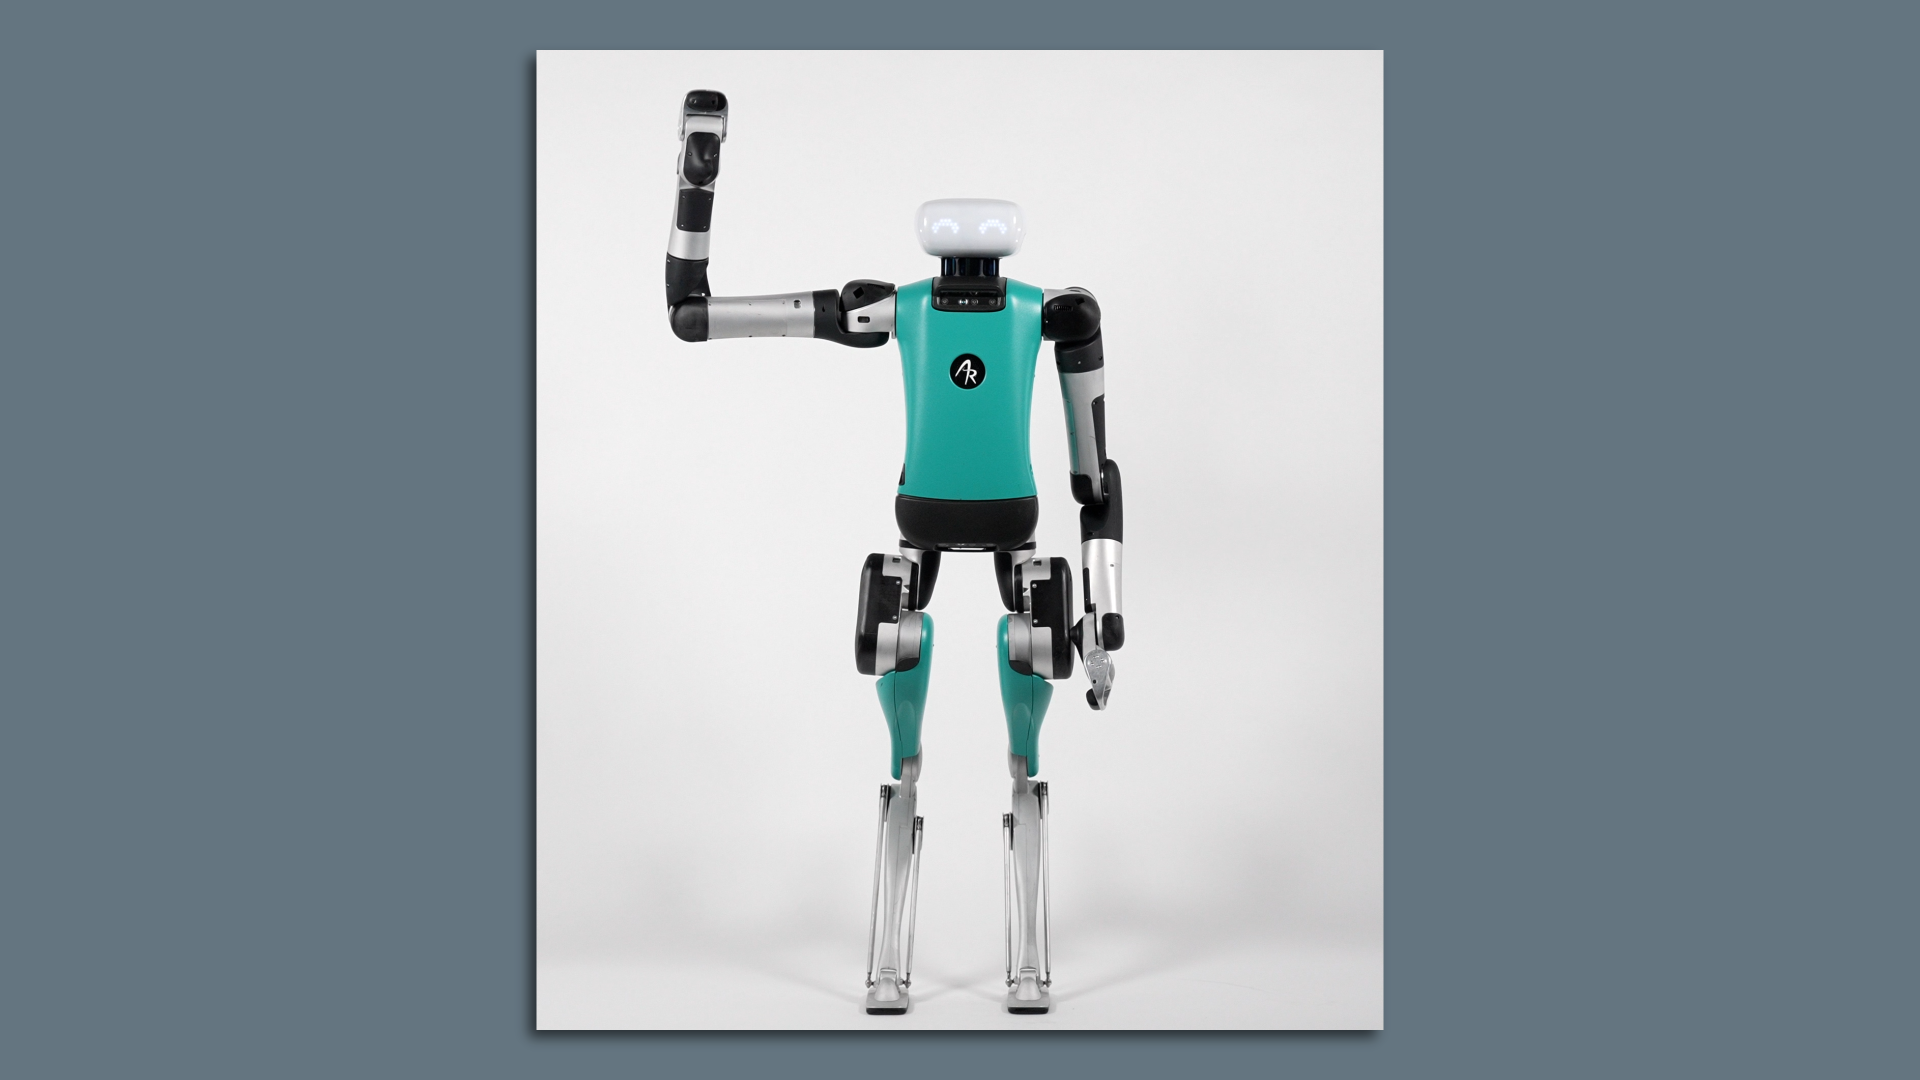 The latest version of Digit, a human-shaped robot from Agility Robotics.